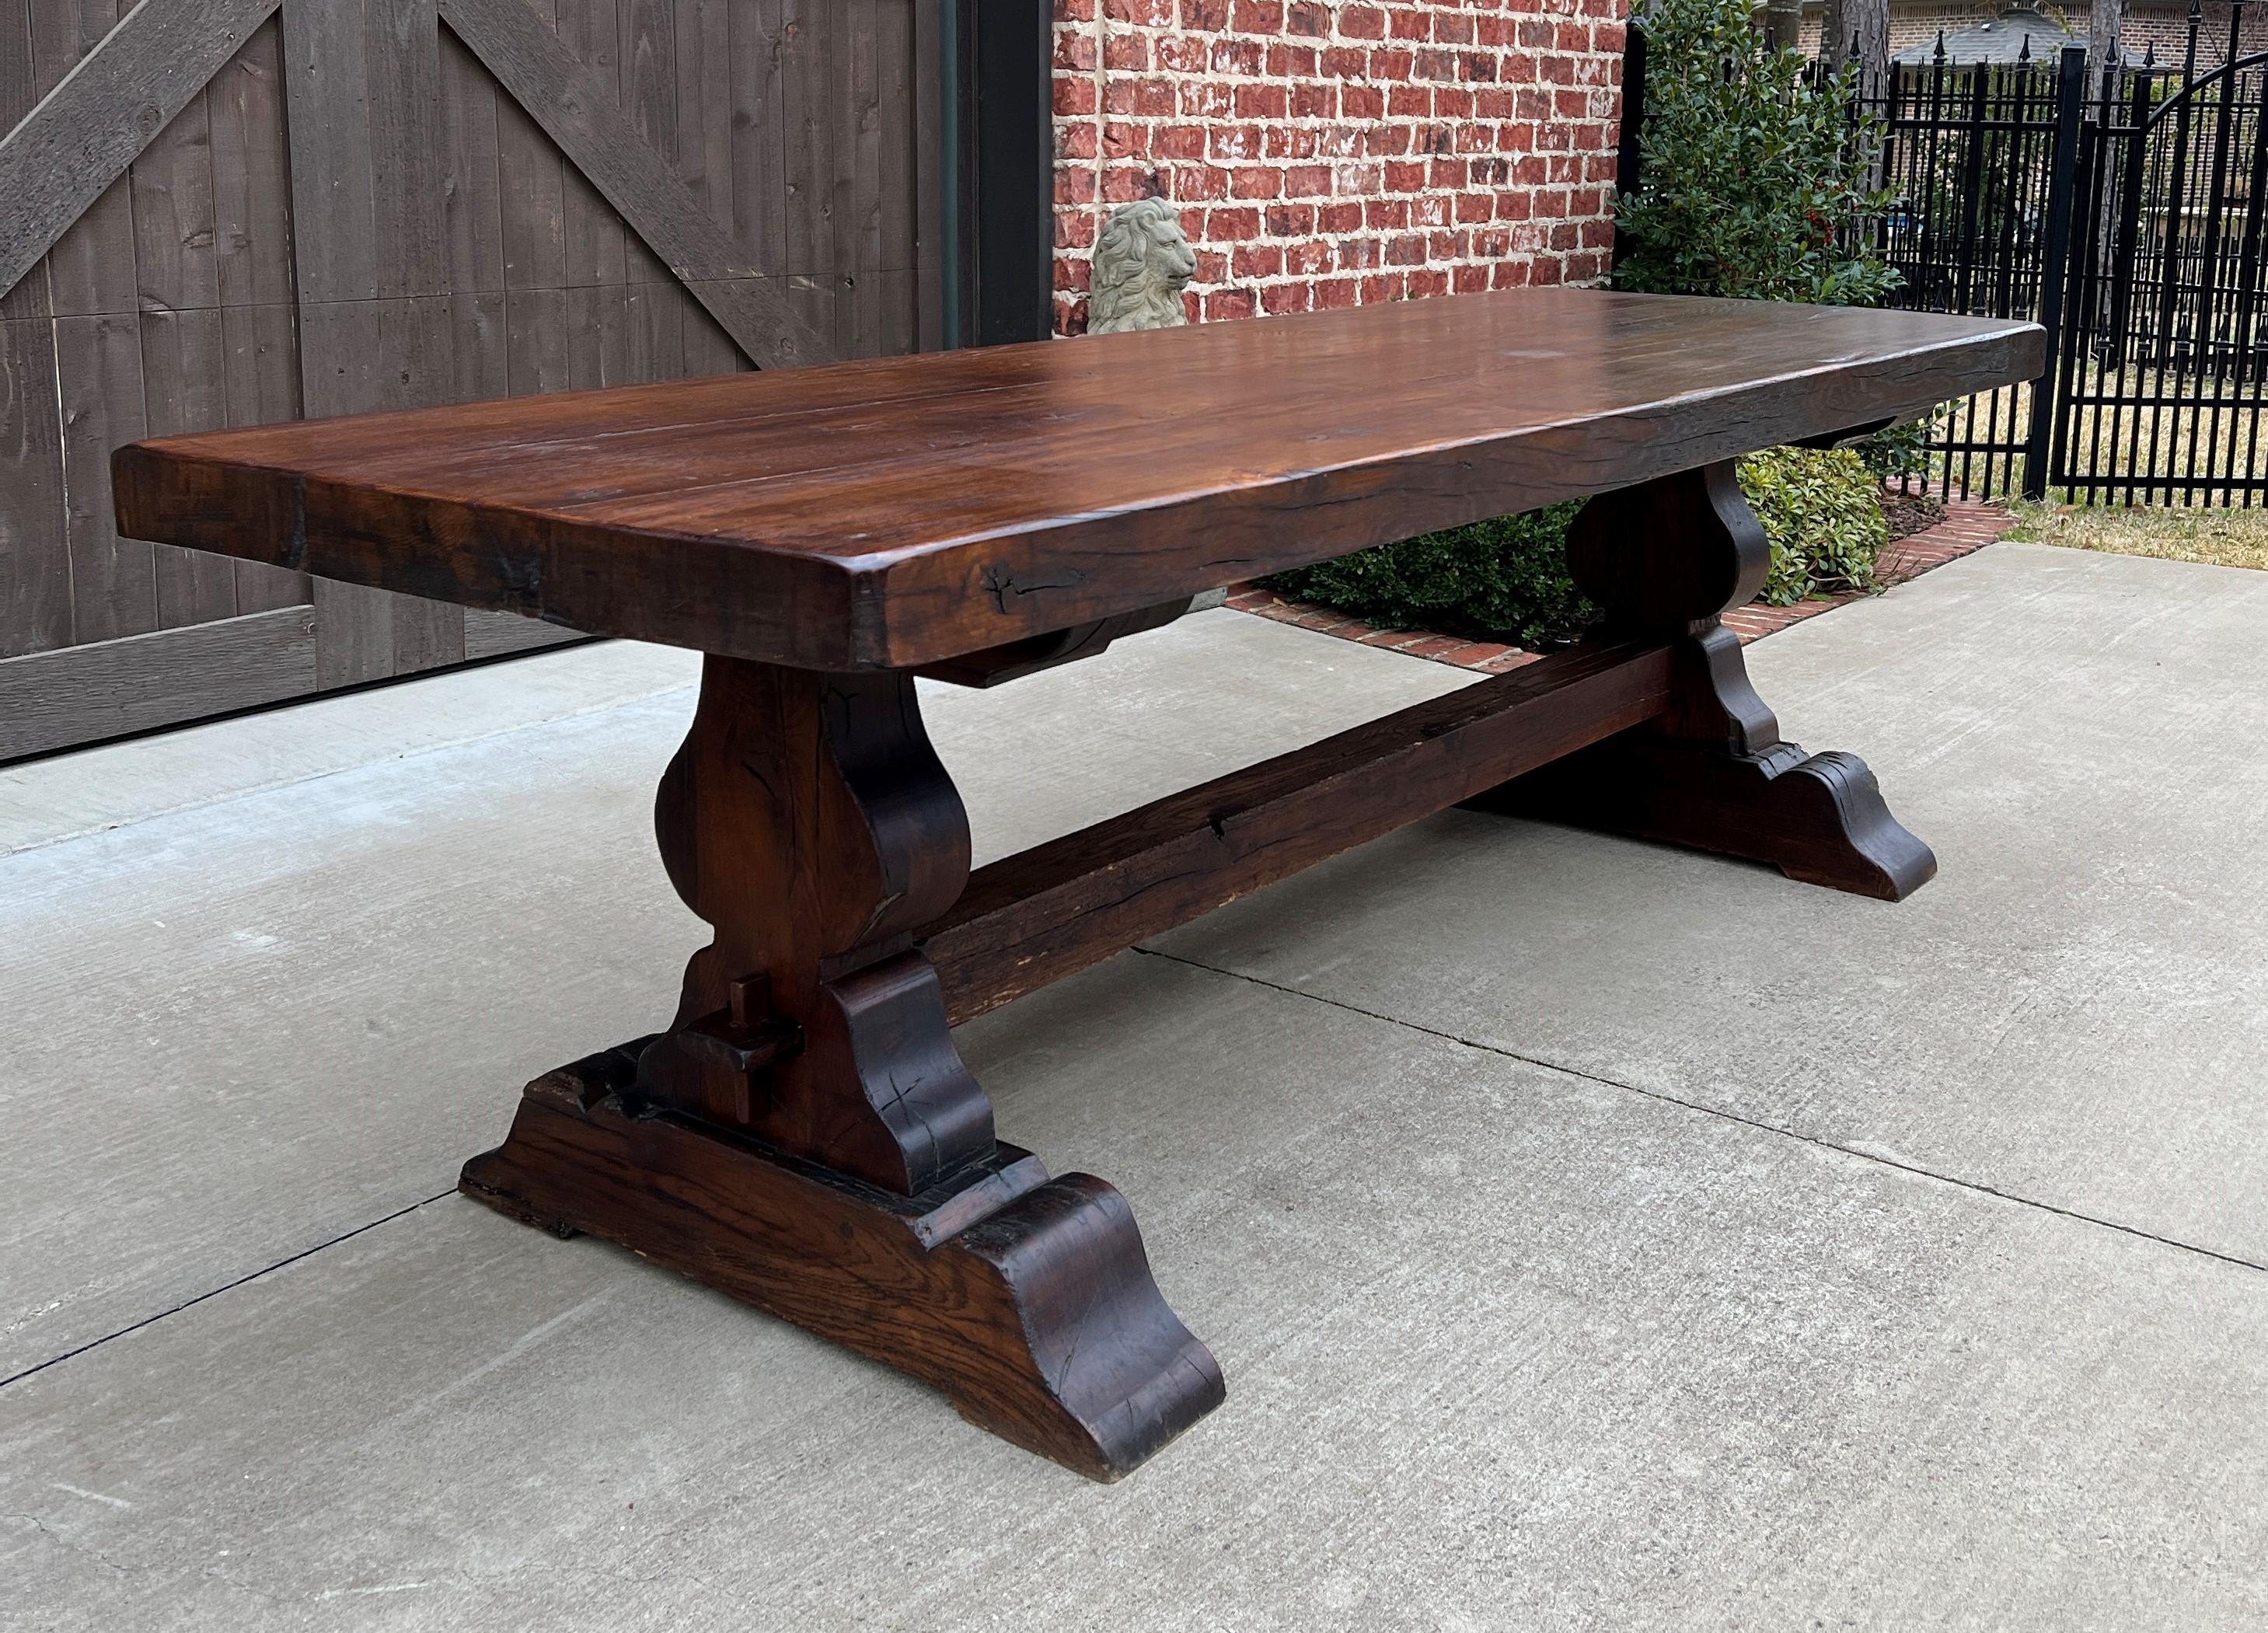 Superb antique french country oak monastery farm farmhouse dining table conference library table or desk with trestle base~~c. Early 19th century

This table has 